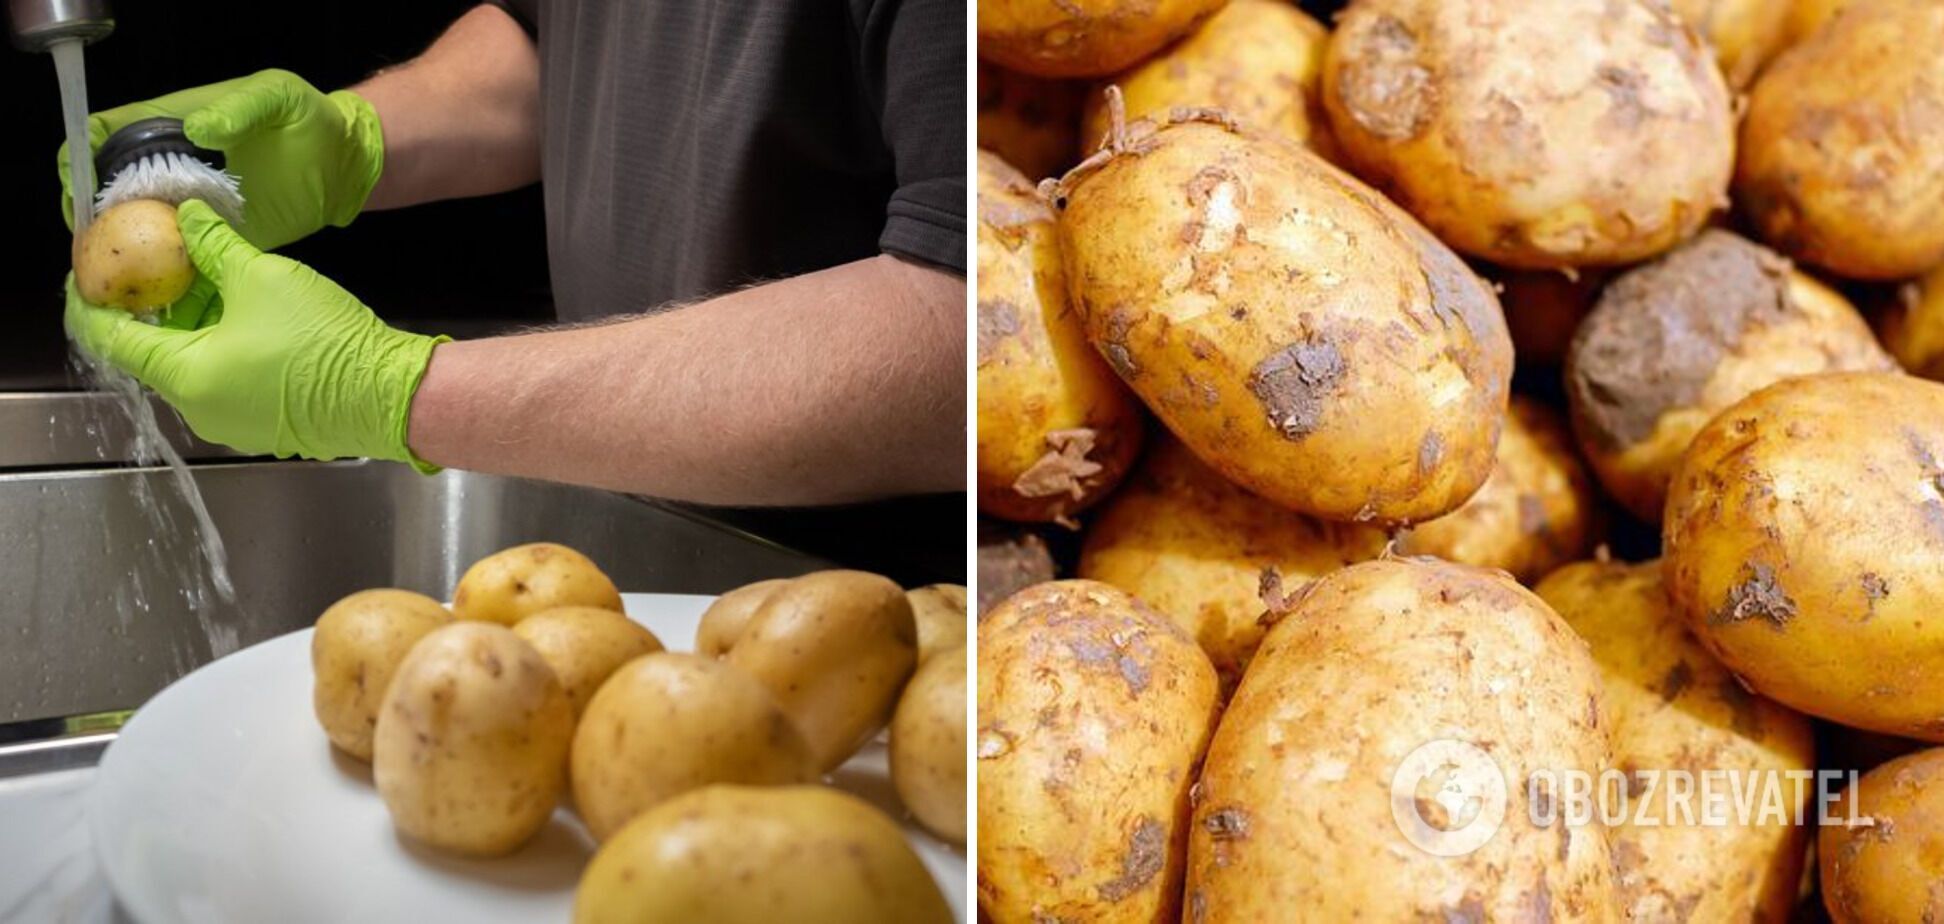 How to peel young potatoes